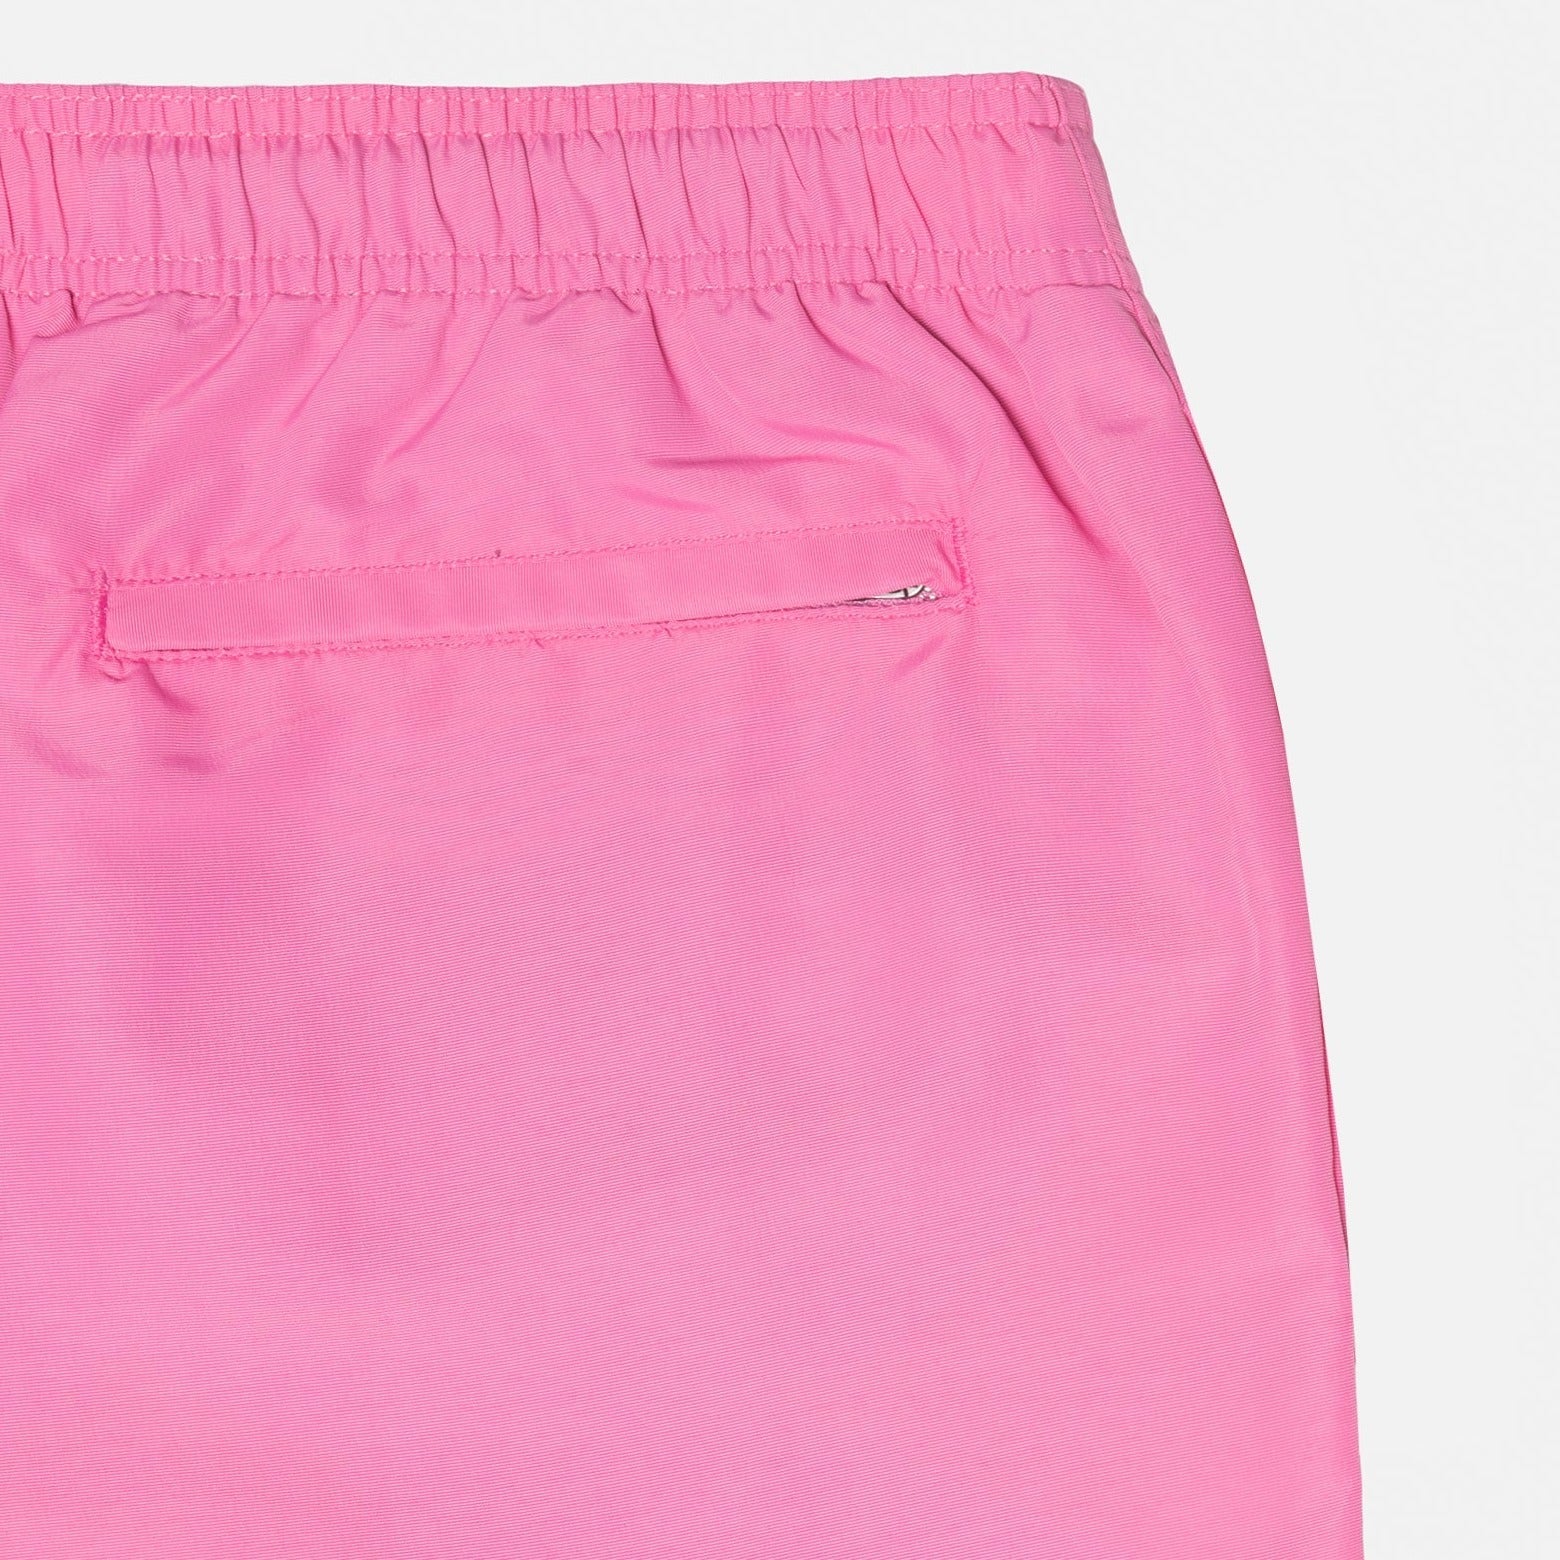 Back detail photo of the Stock Water Short - Gum Pink.